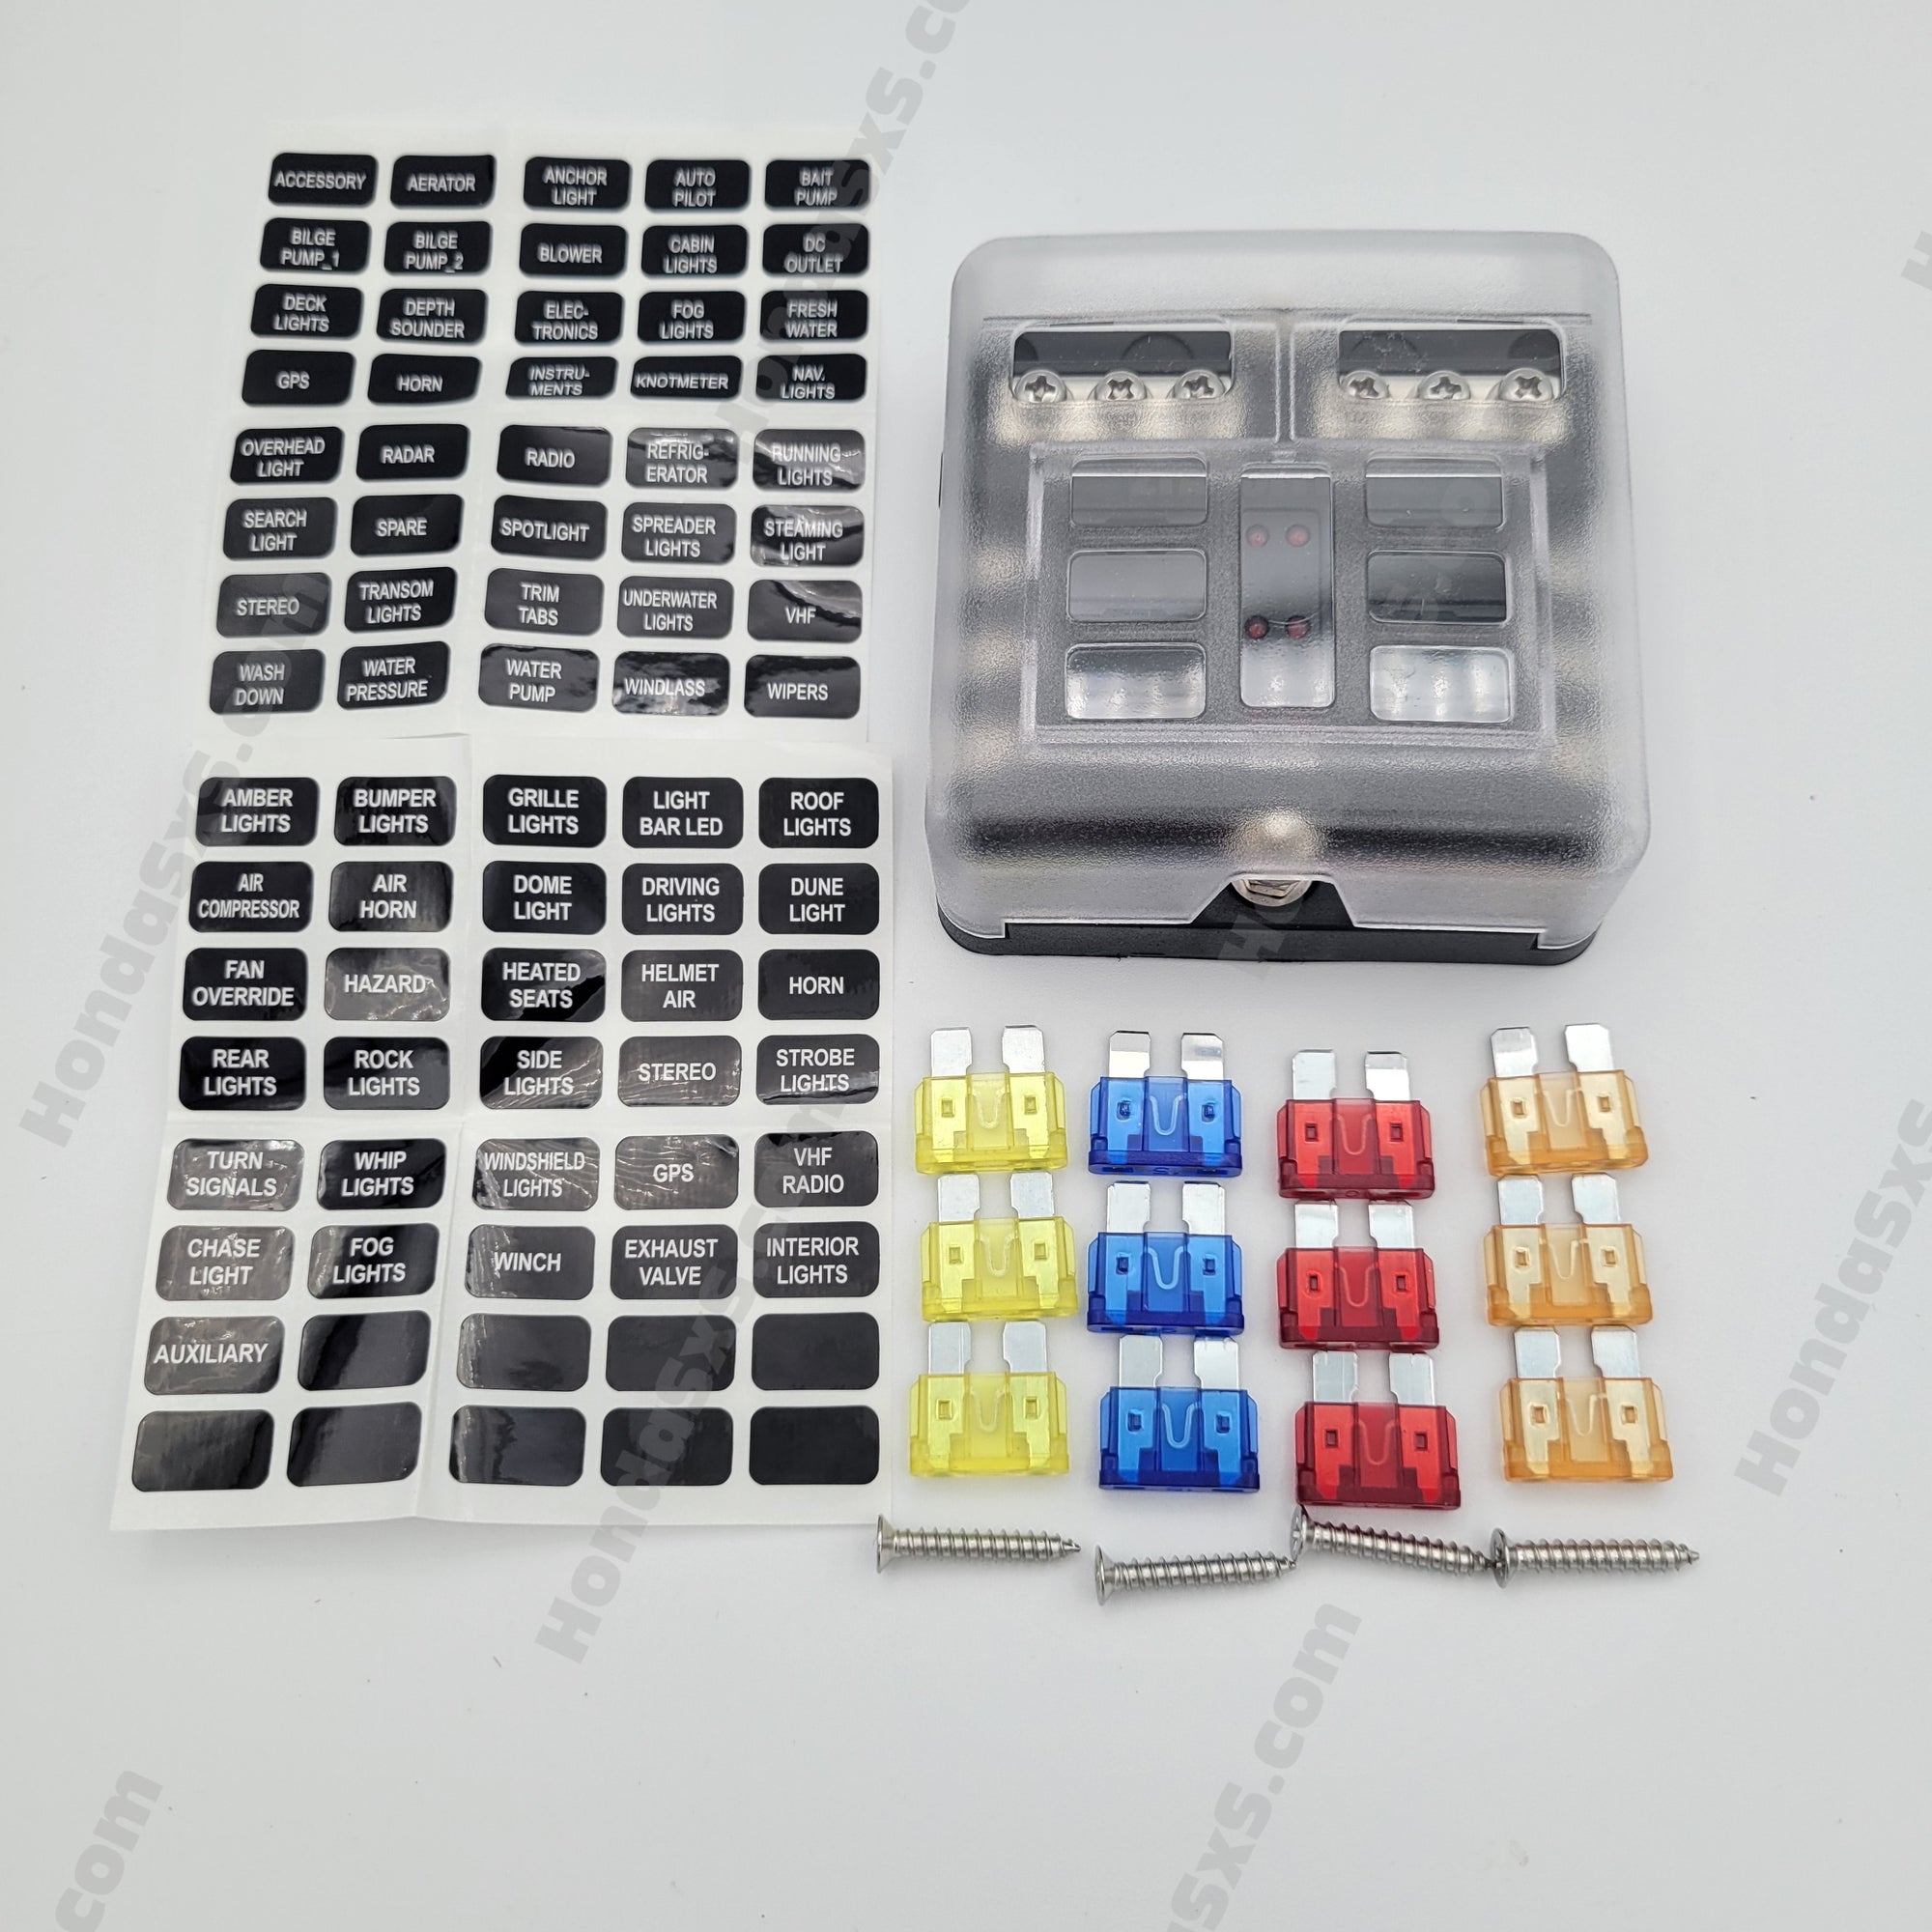 Fuse box with negative bus. 6 or 12 fuse unit, includes variety of fuses. FuseBox